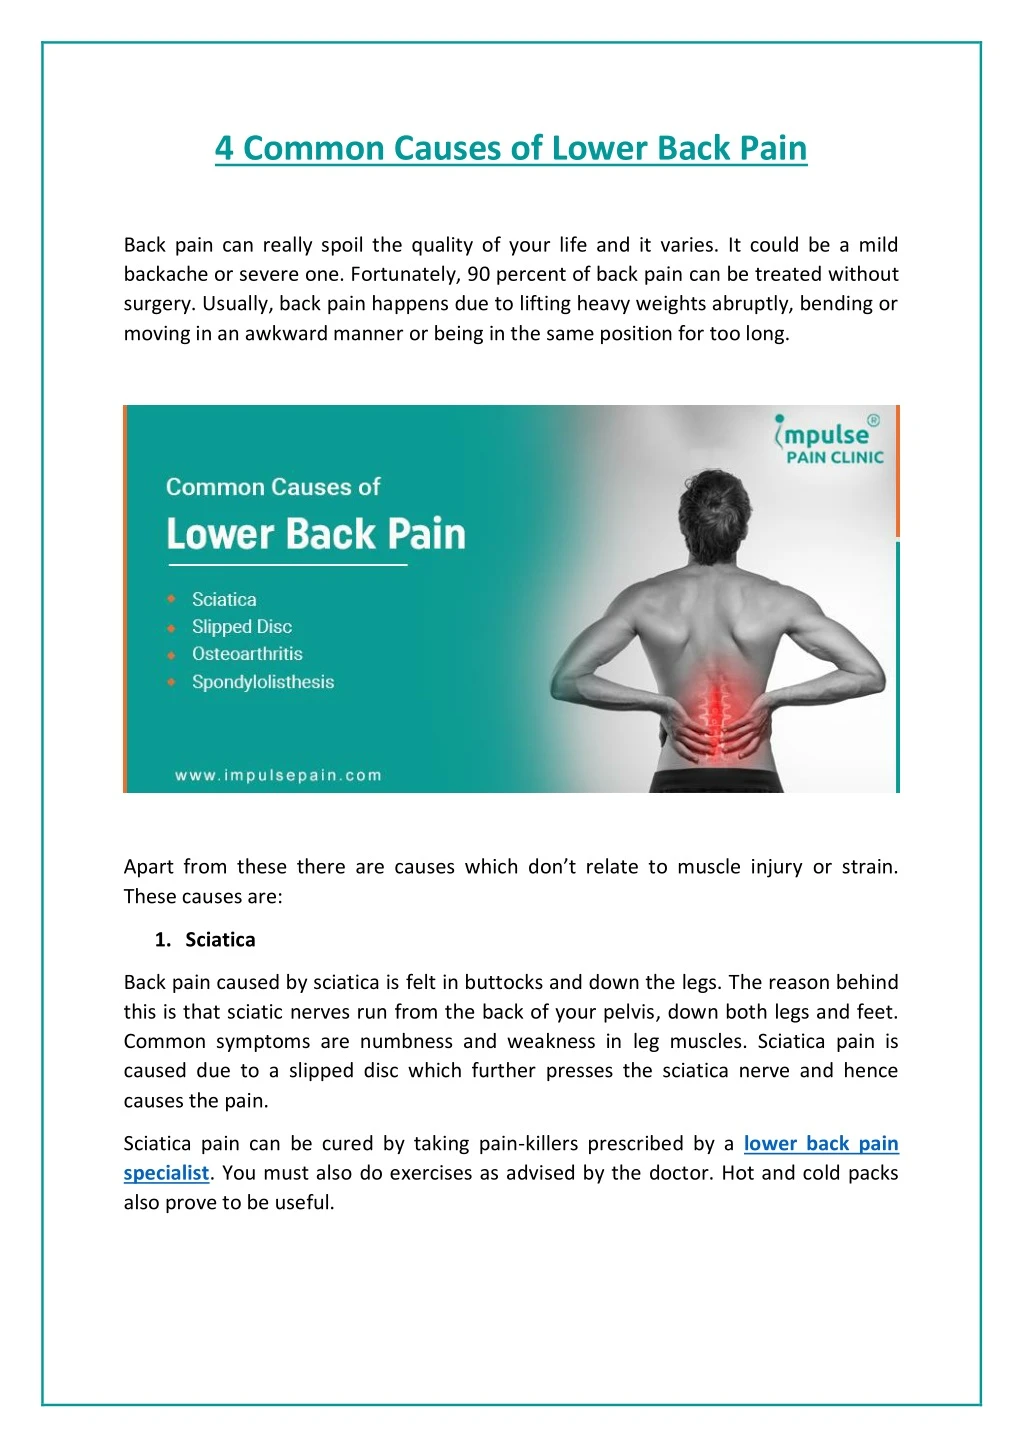 4 common causes of lower back pain